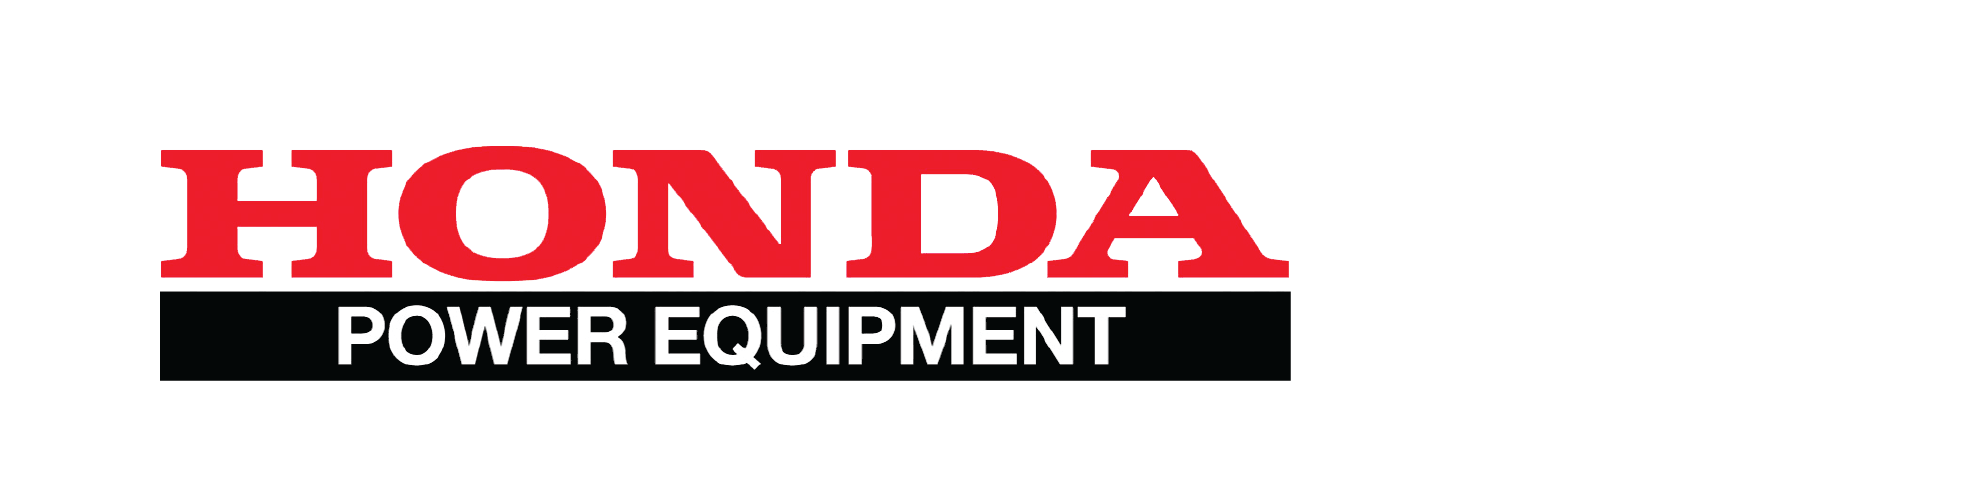 Palco is an authorized distributor of Honda Power Equipment